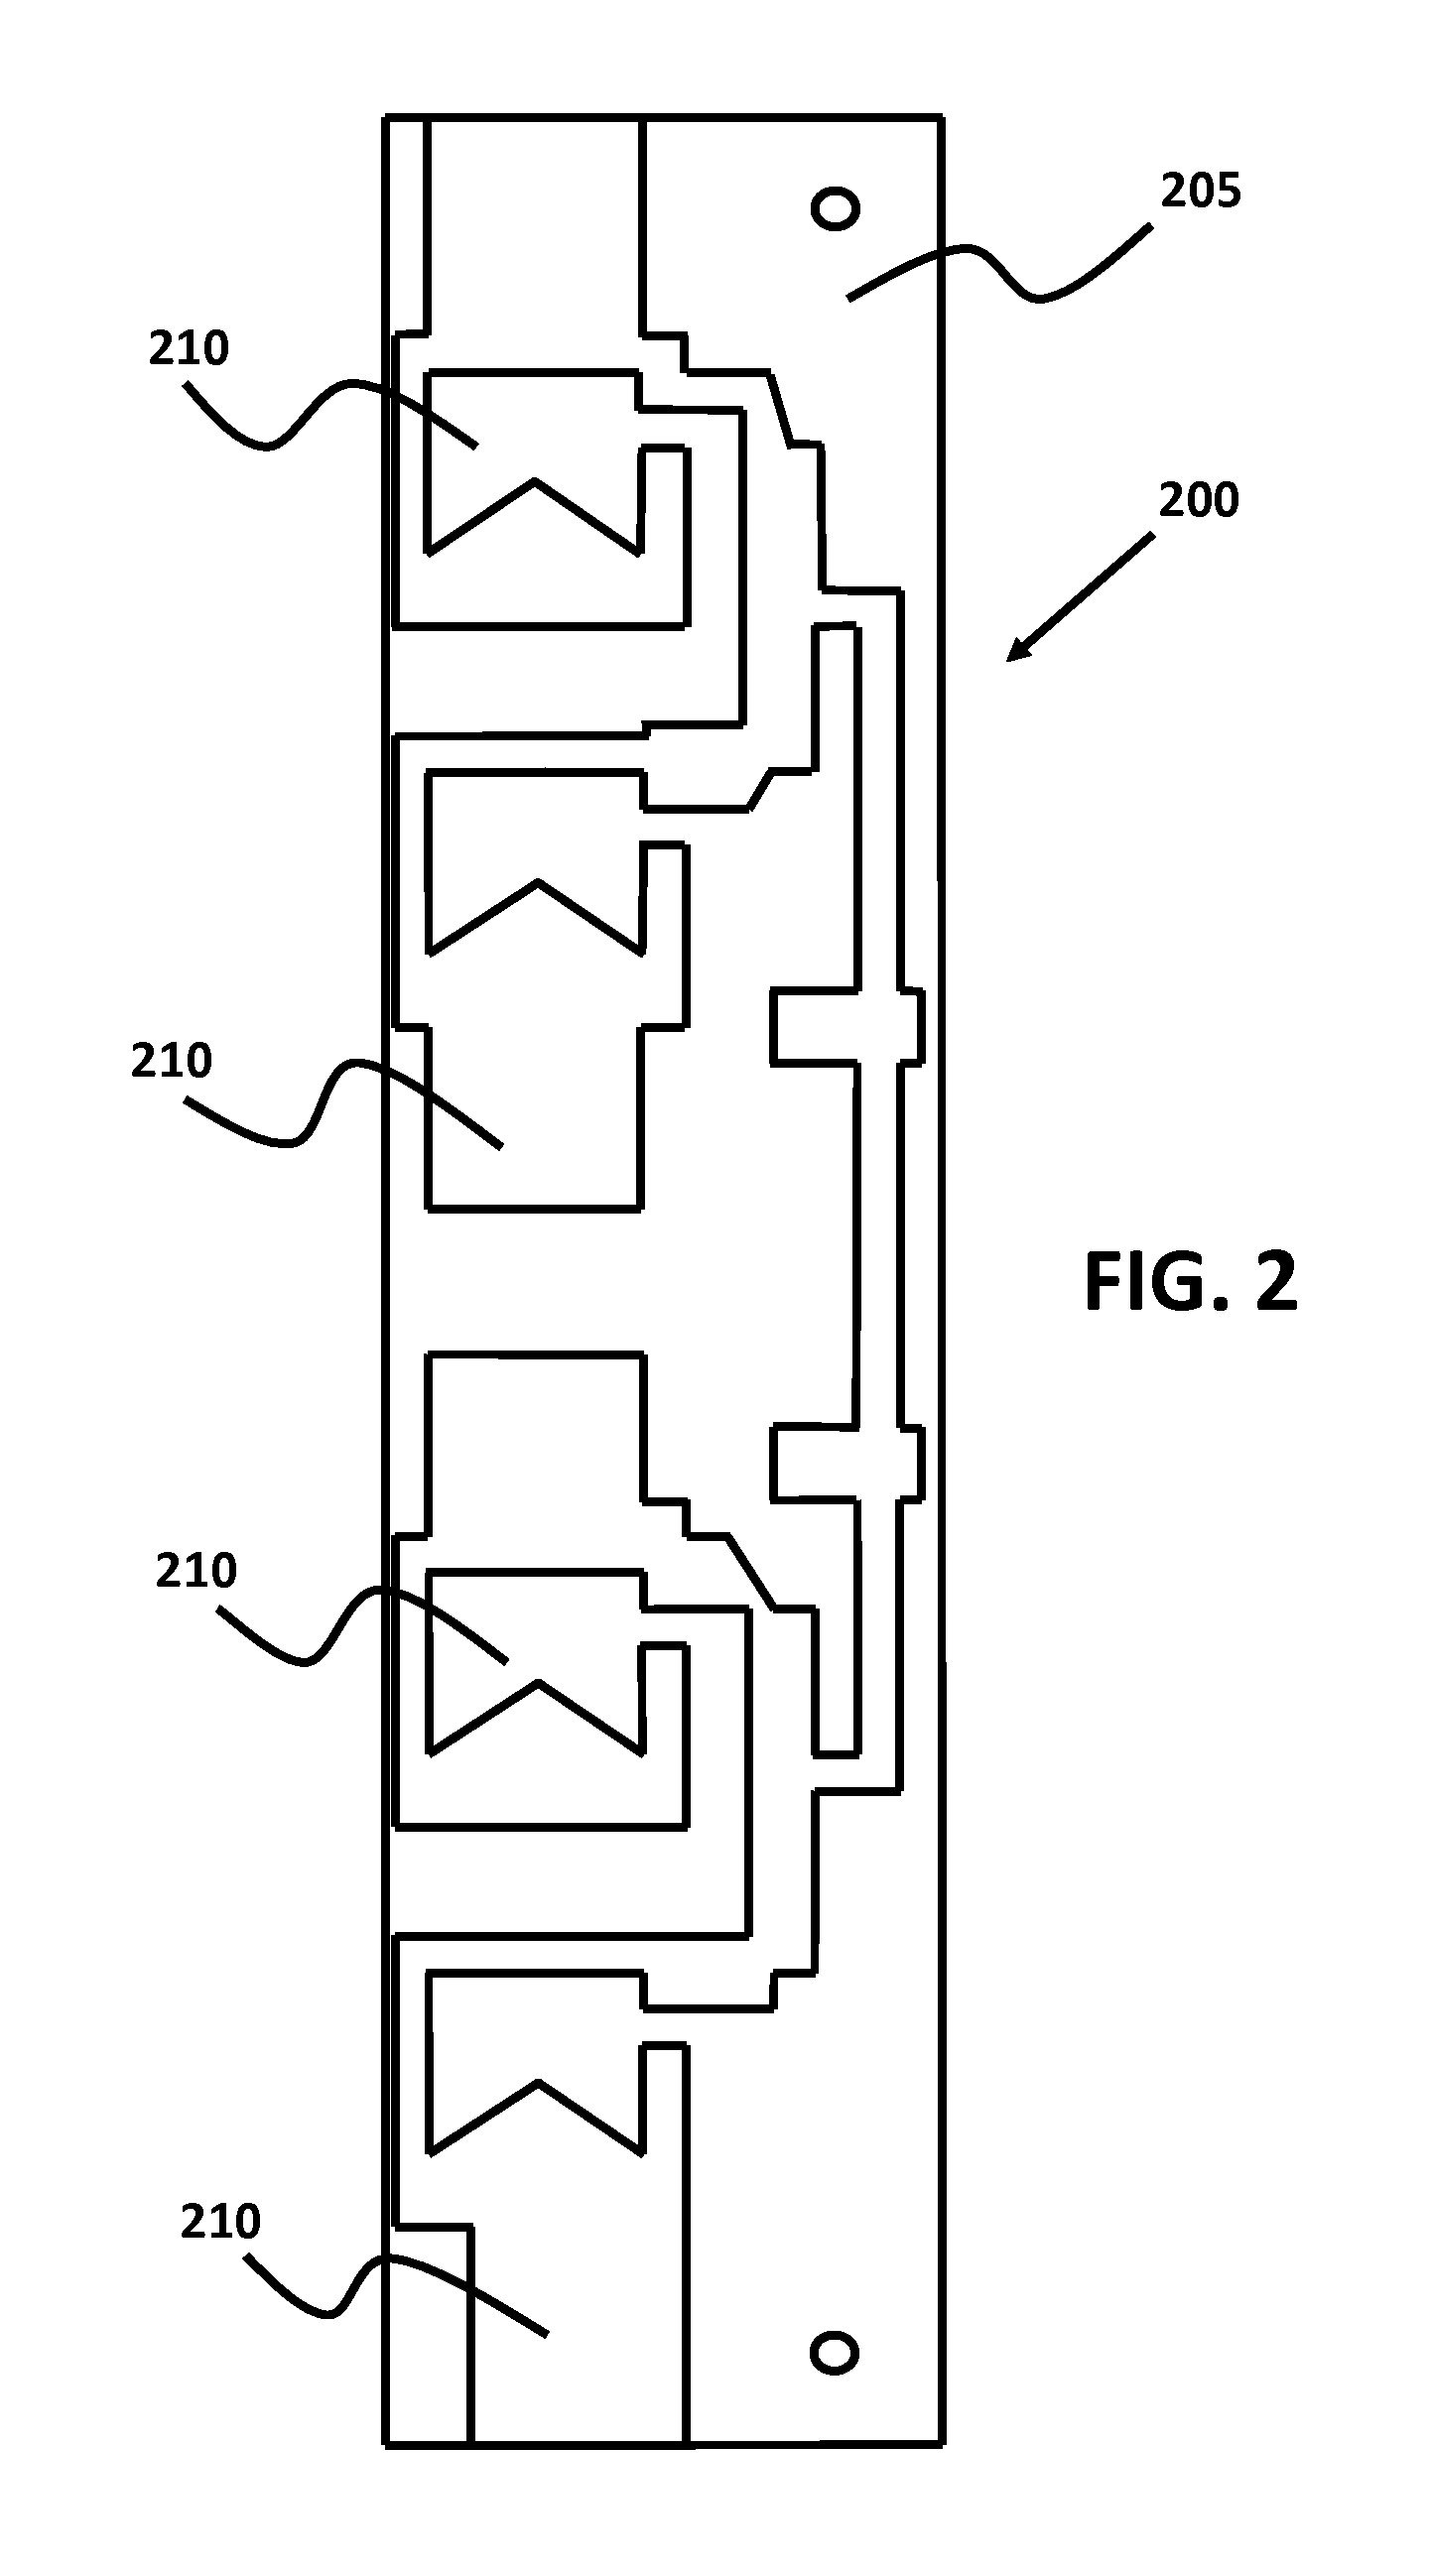 Self-contained counterpoise compound loop antenna